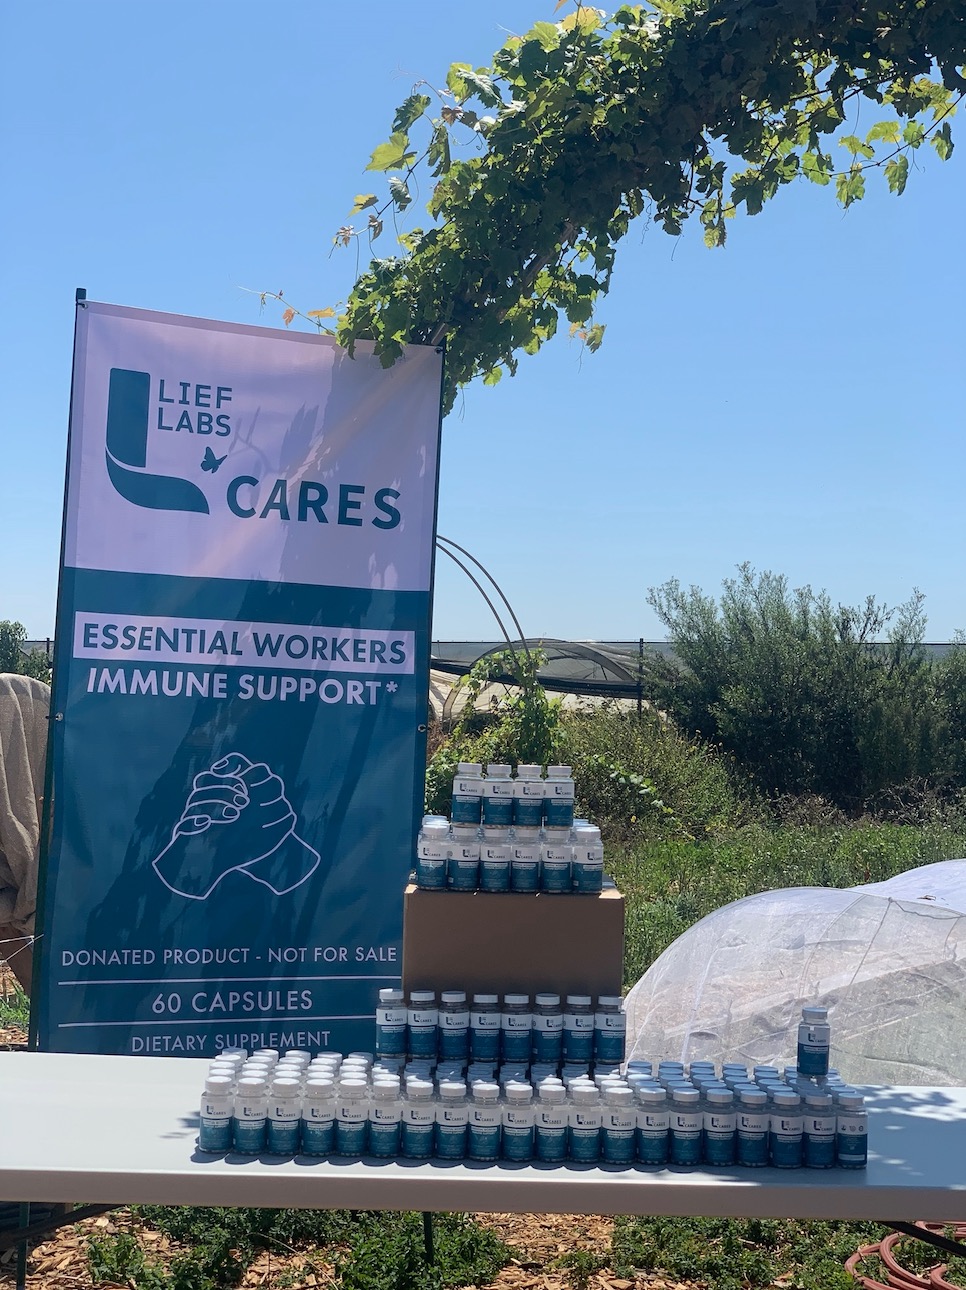 Lief Labs, Wednesday, September 2, 2020, Press release picture